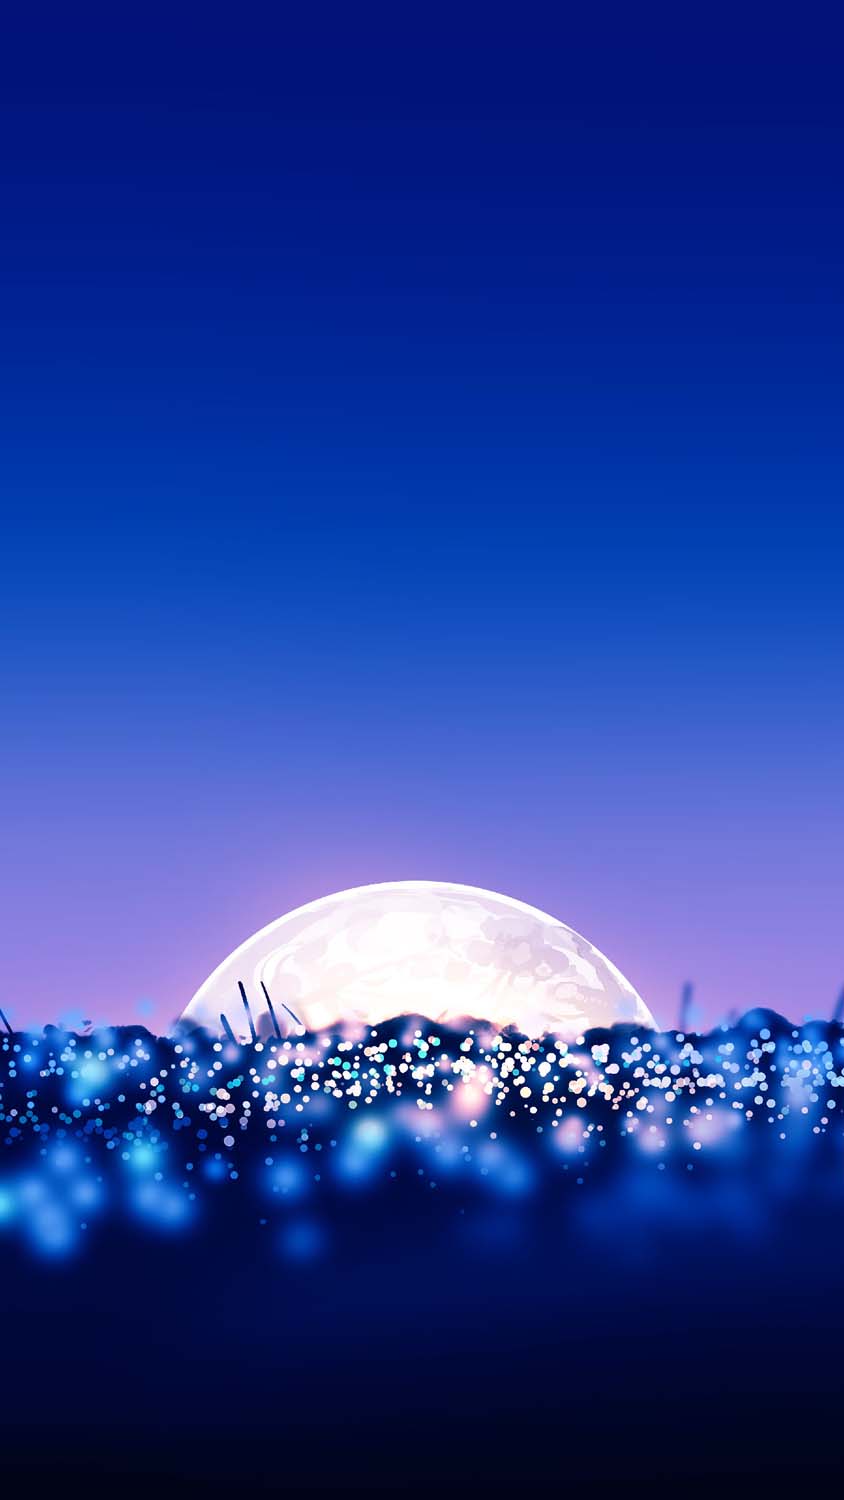 Moon Rise IPhone Wallpaper HD - IPhone Wallpapers : iPhone Wallpapers